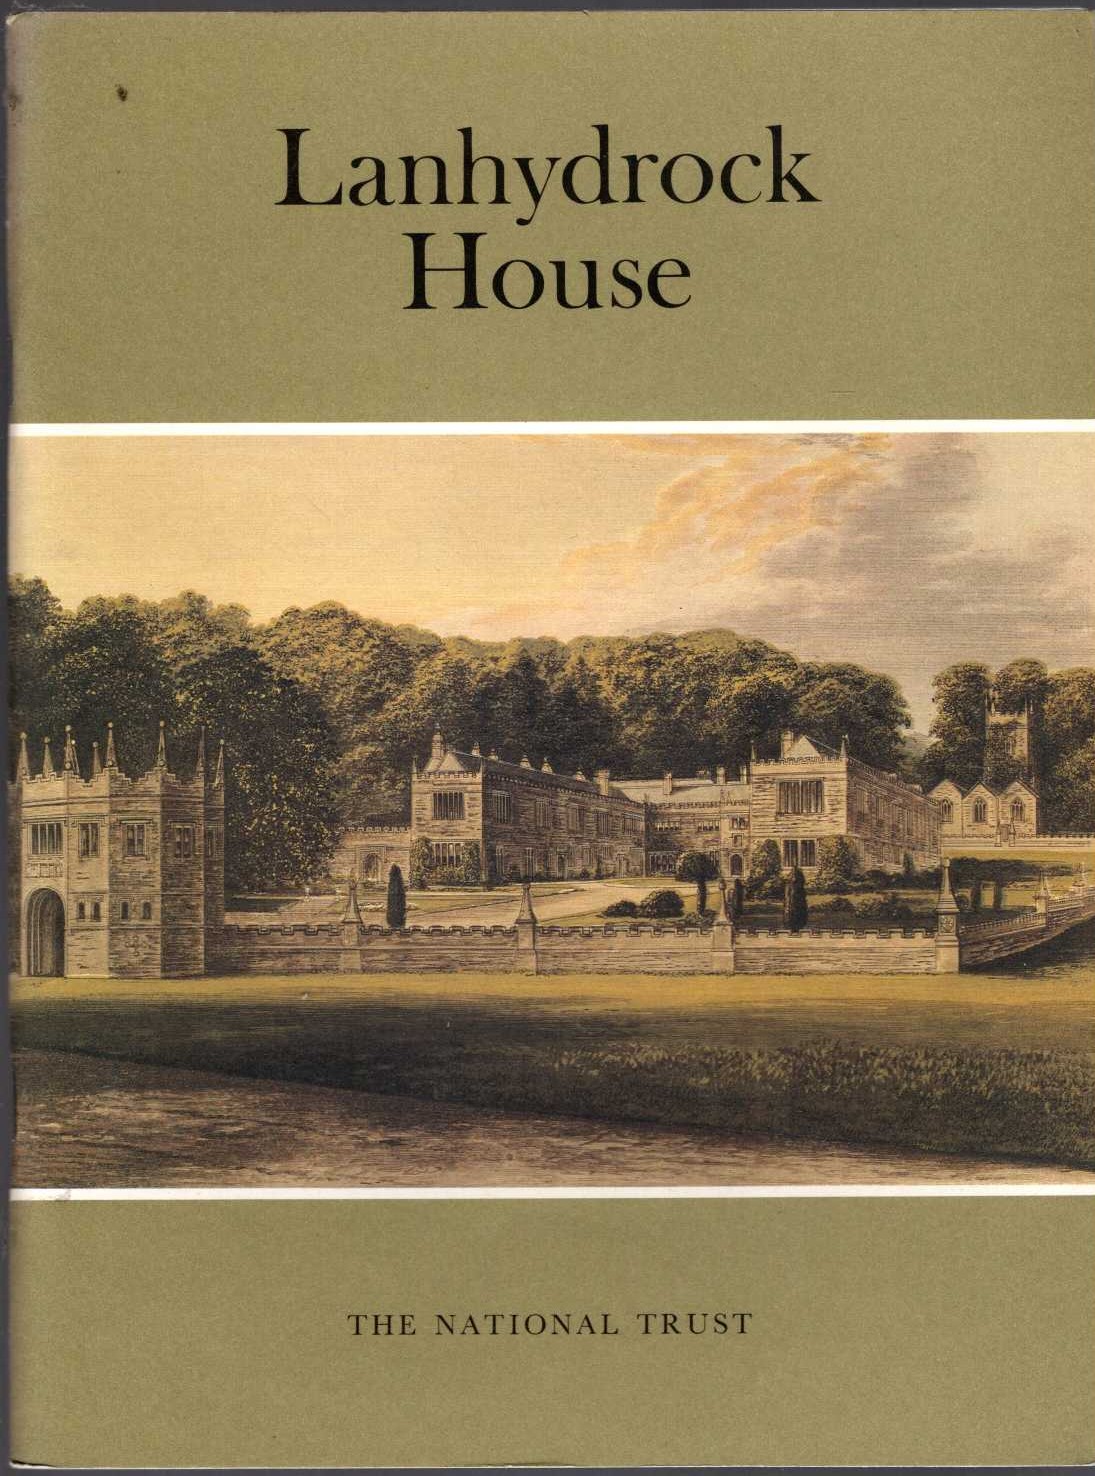 \ LANHYDROCK HOUSE by The National Trust front book cover image